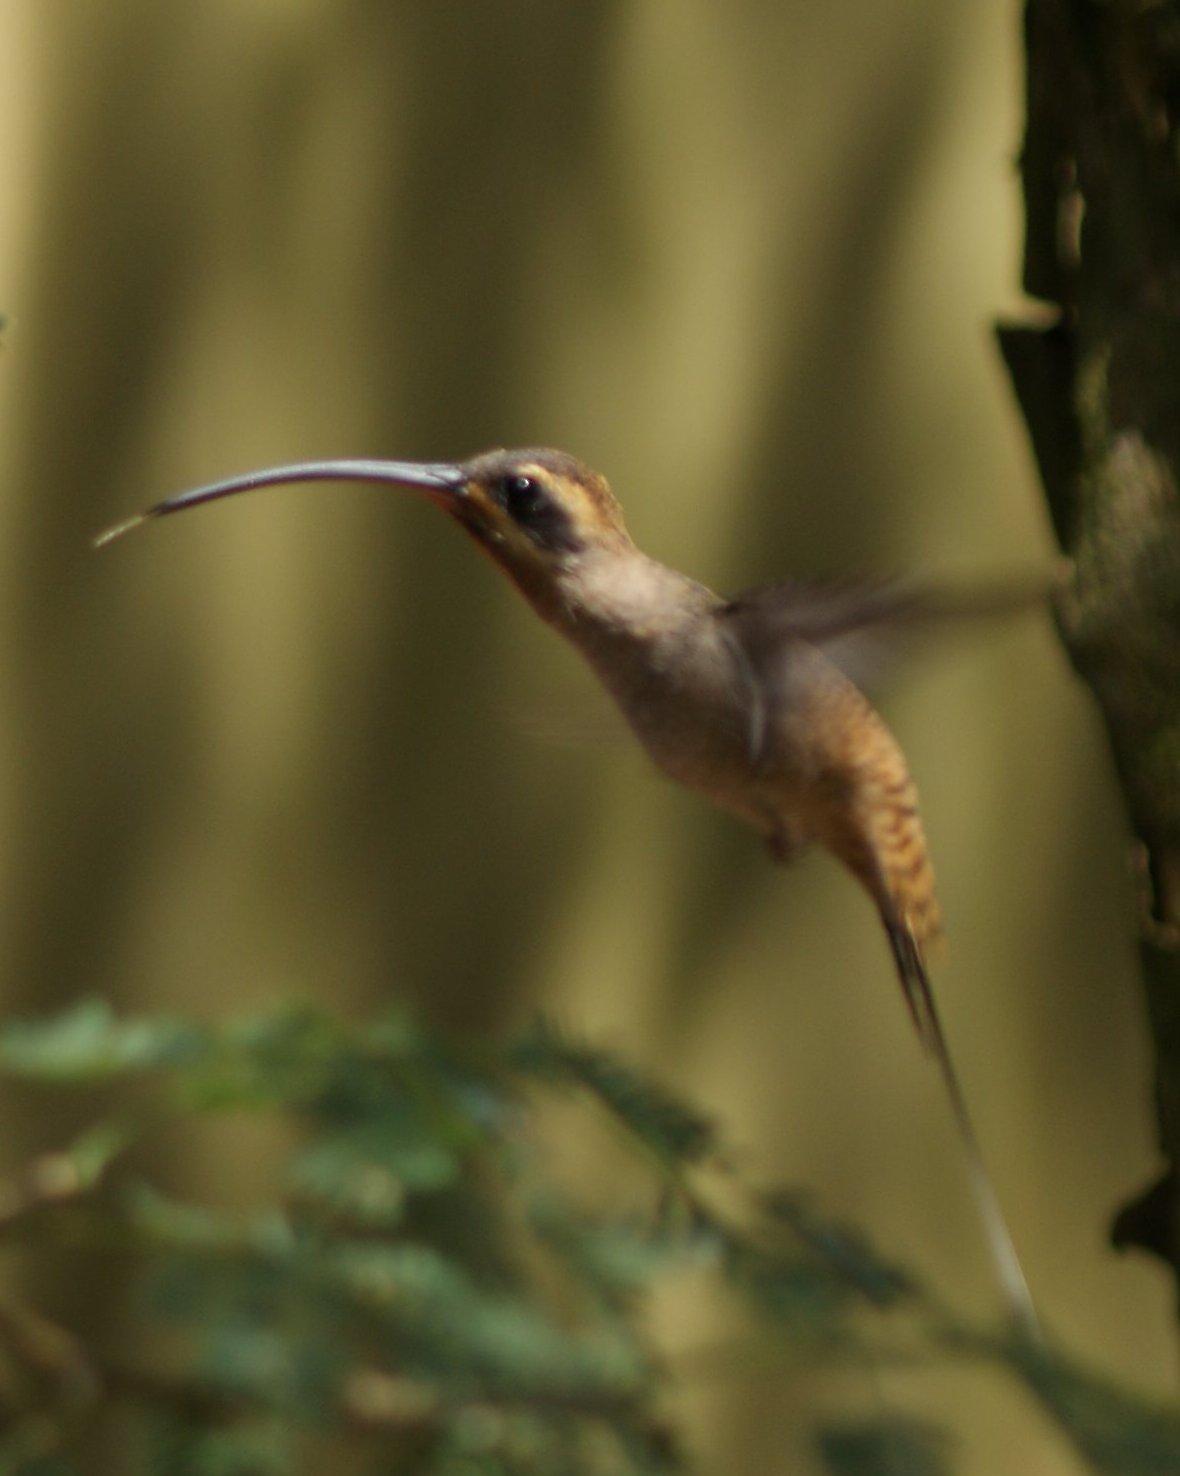 Long-billed Hermit Photo by Robin Oxley